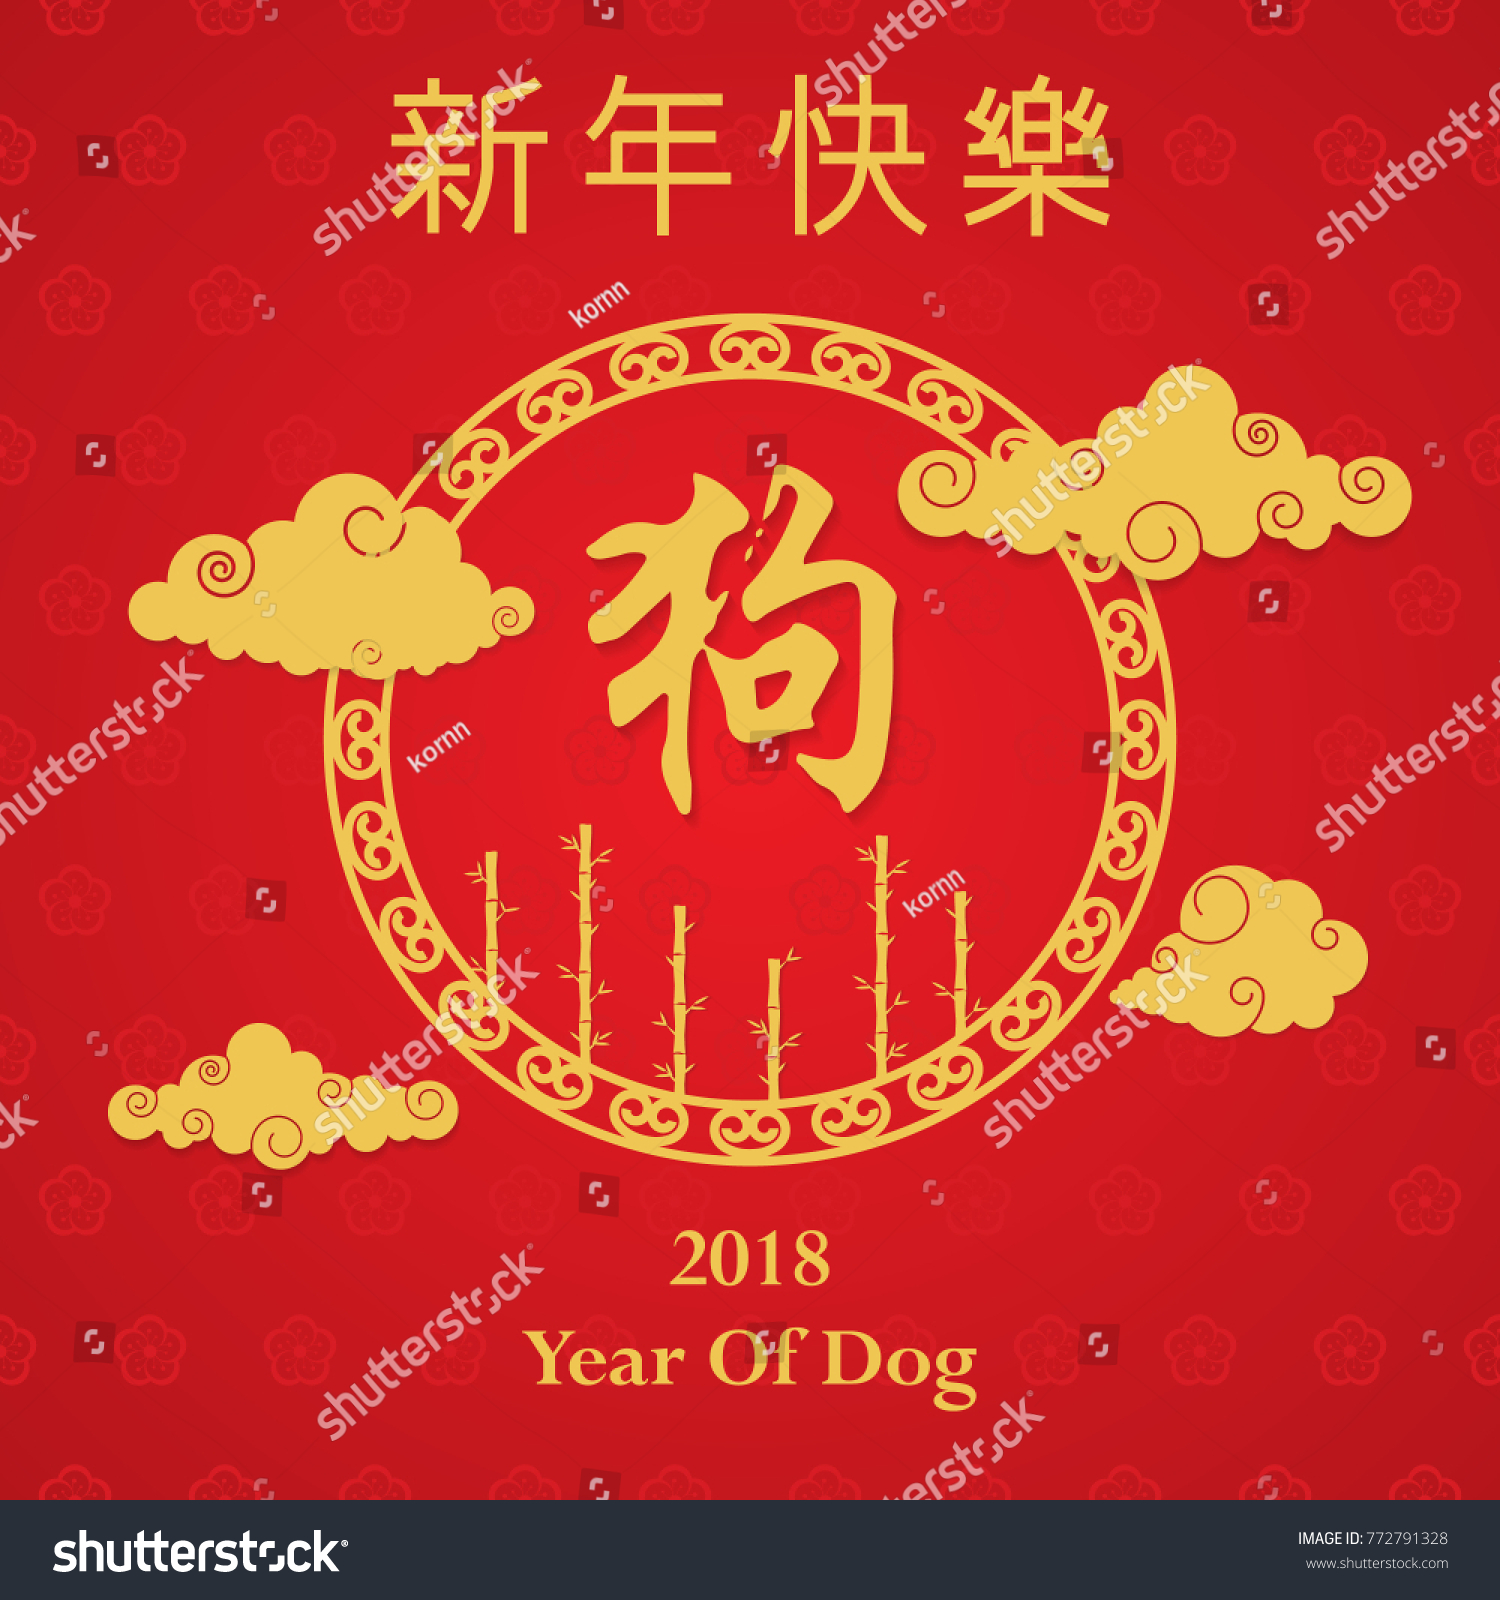 Chinese New Year Dog Year Wallpaperchinese Stock Vector Royalty